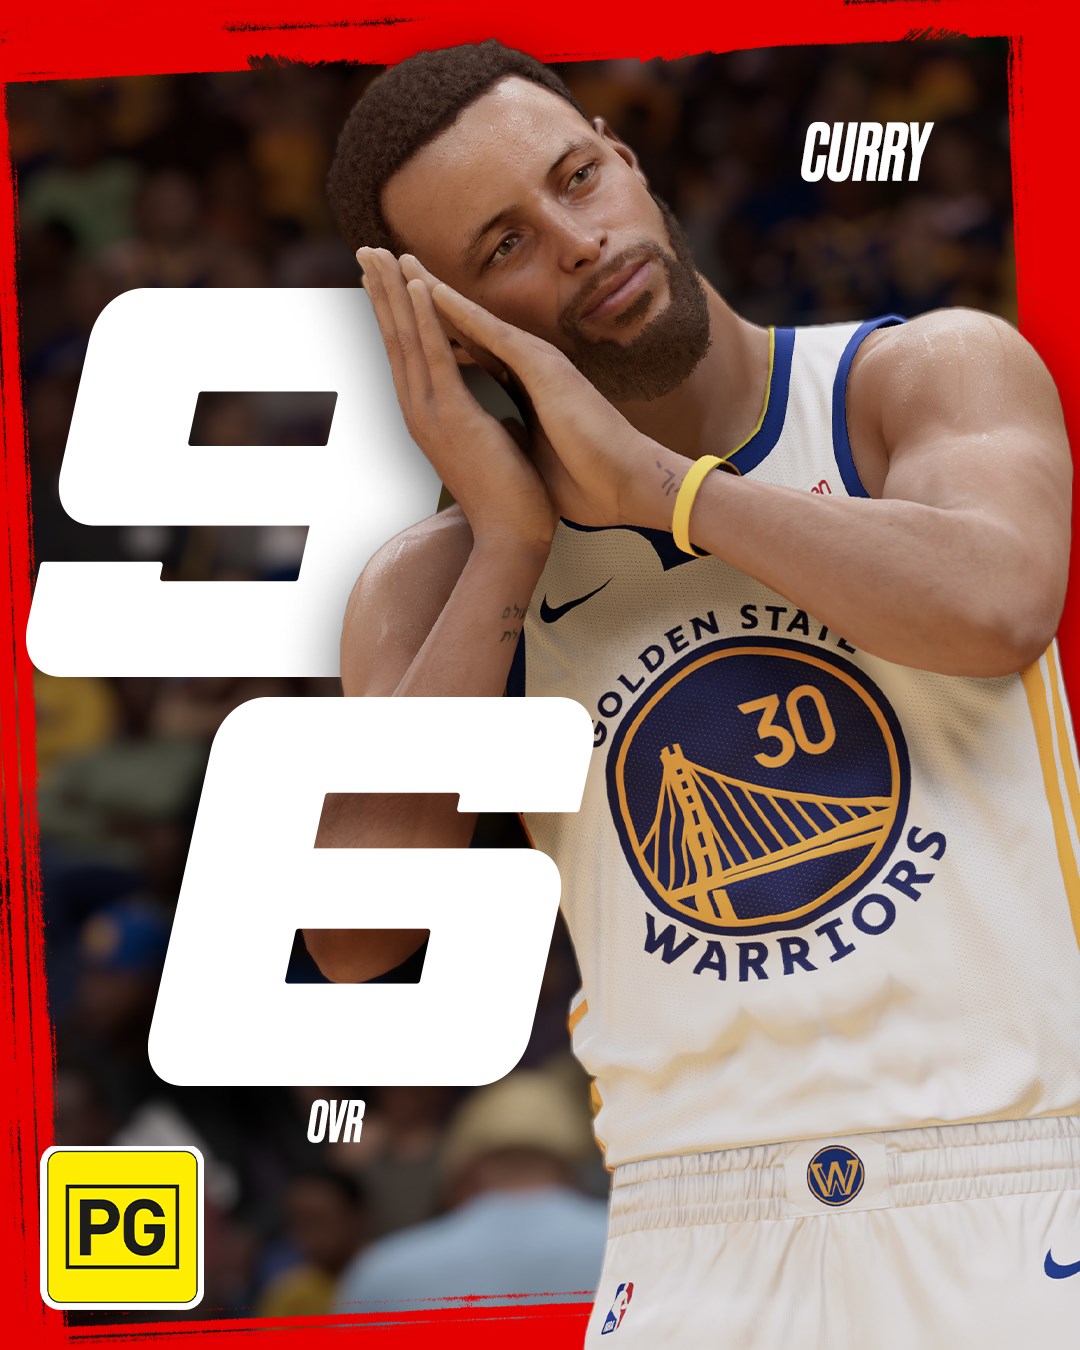 2K23 2KDAY COUNTDOWN INDIVIDUAL RATING CURRY OFLC 1080x1350 R1